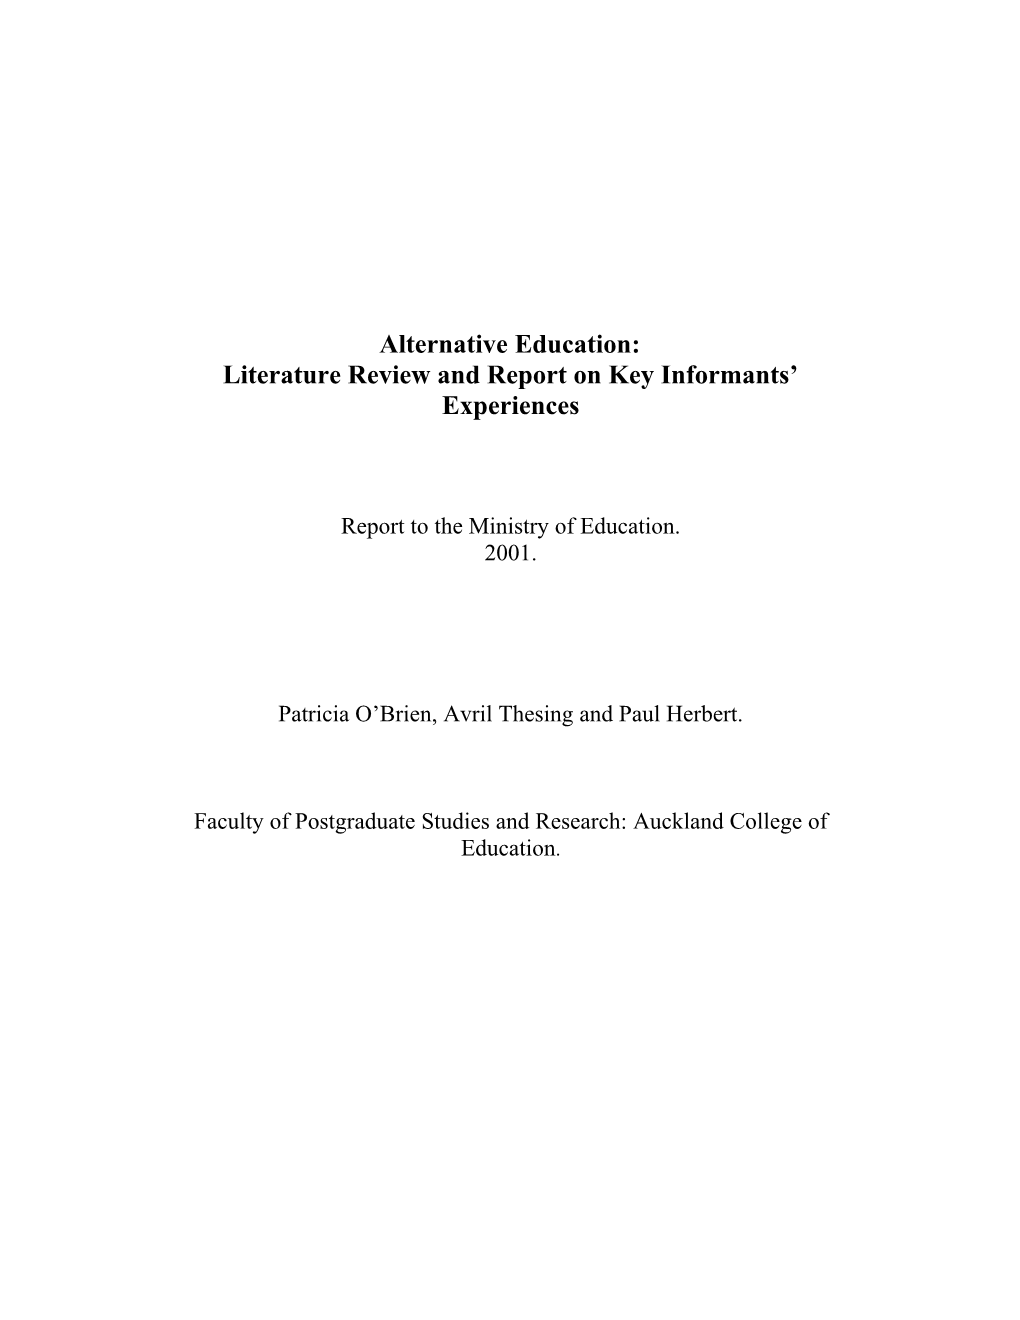 Literature Review and Report on Key Informants Experiences